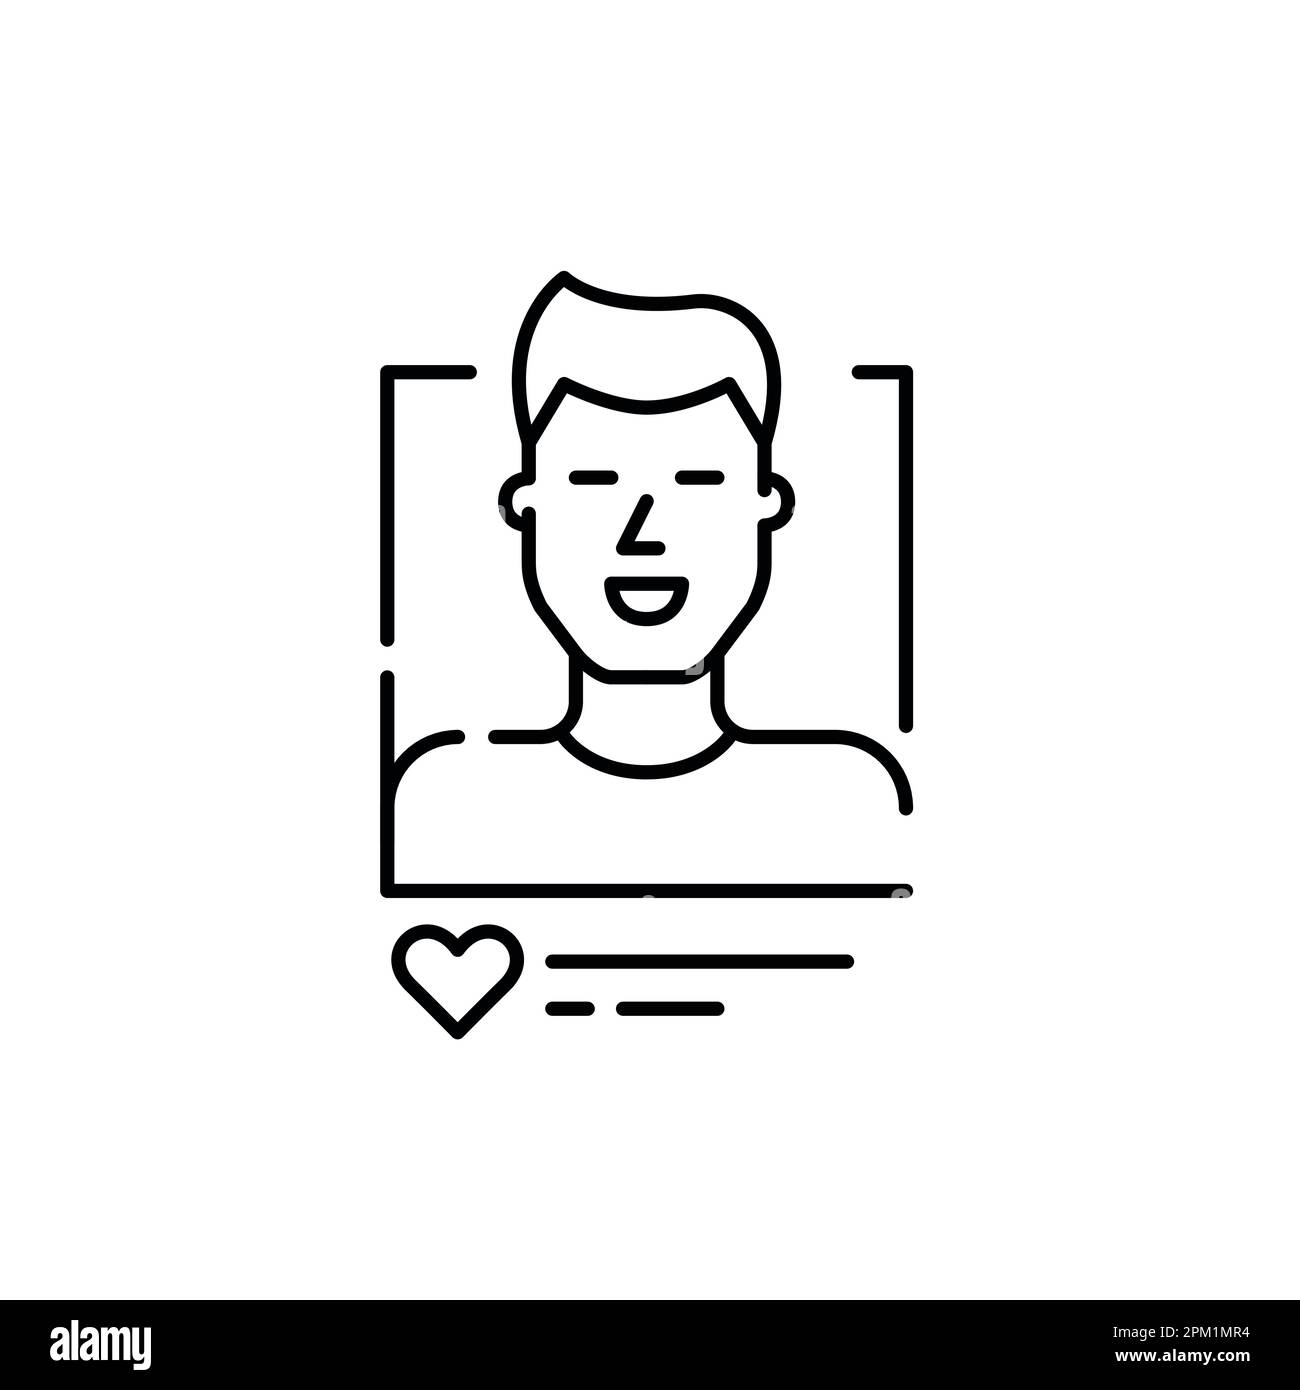 Handsome smiling man dating app profile. Receiving likes. Pixel perfect, editable stroke line icon Stock Vector